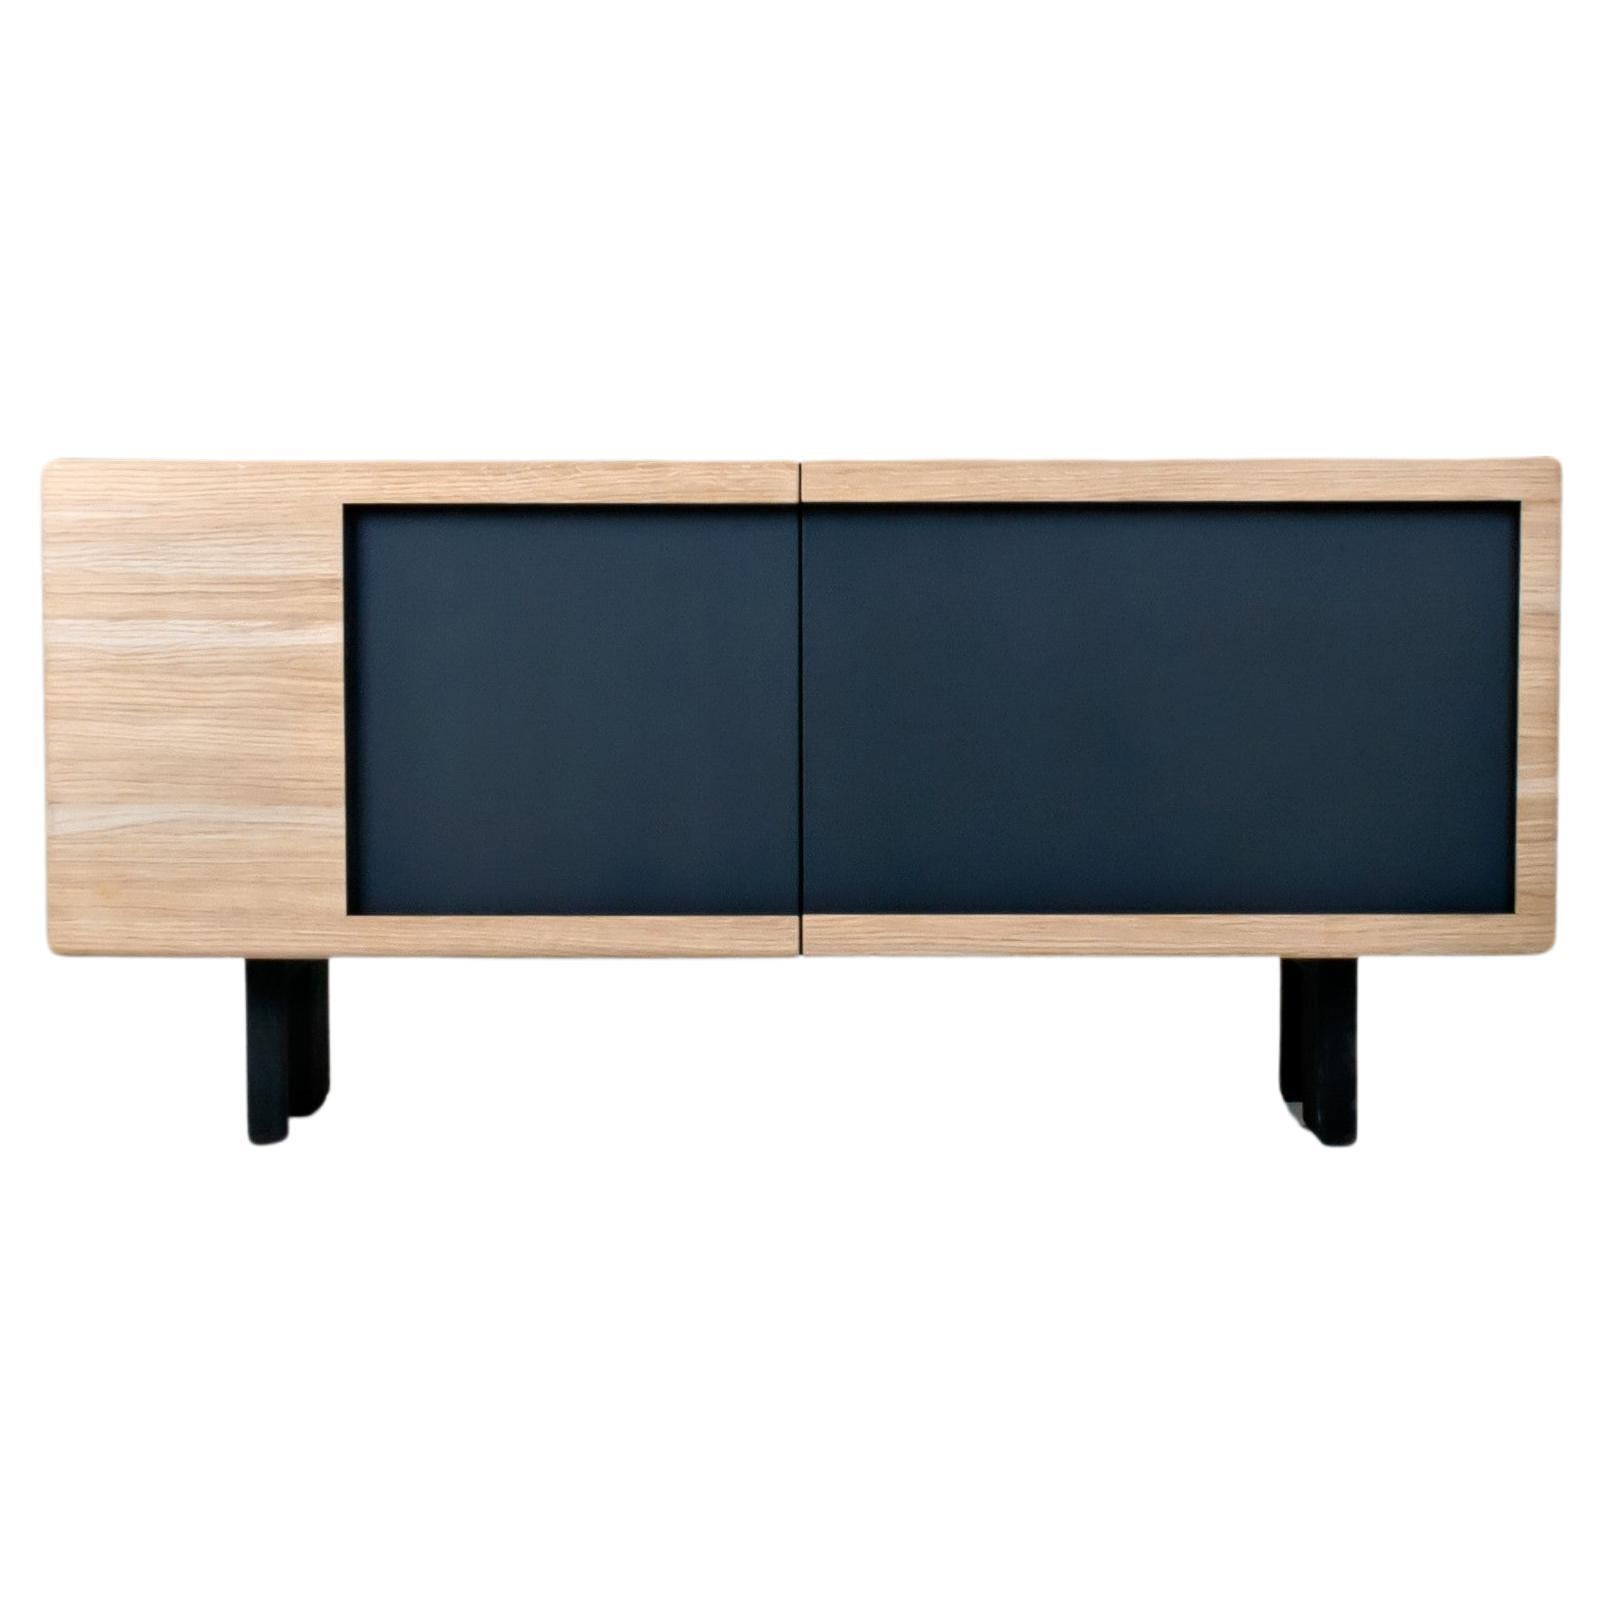 Analog Sideboard For Sale